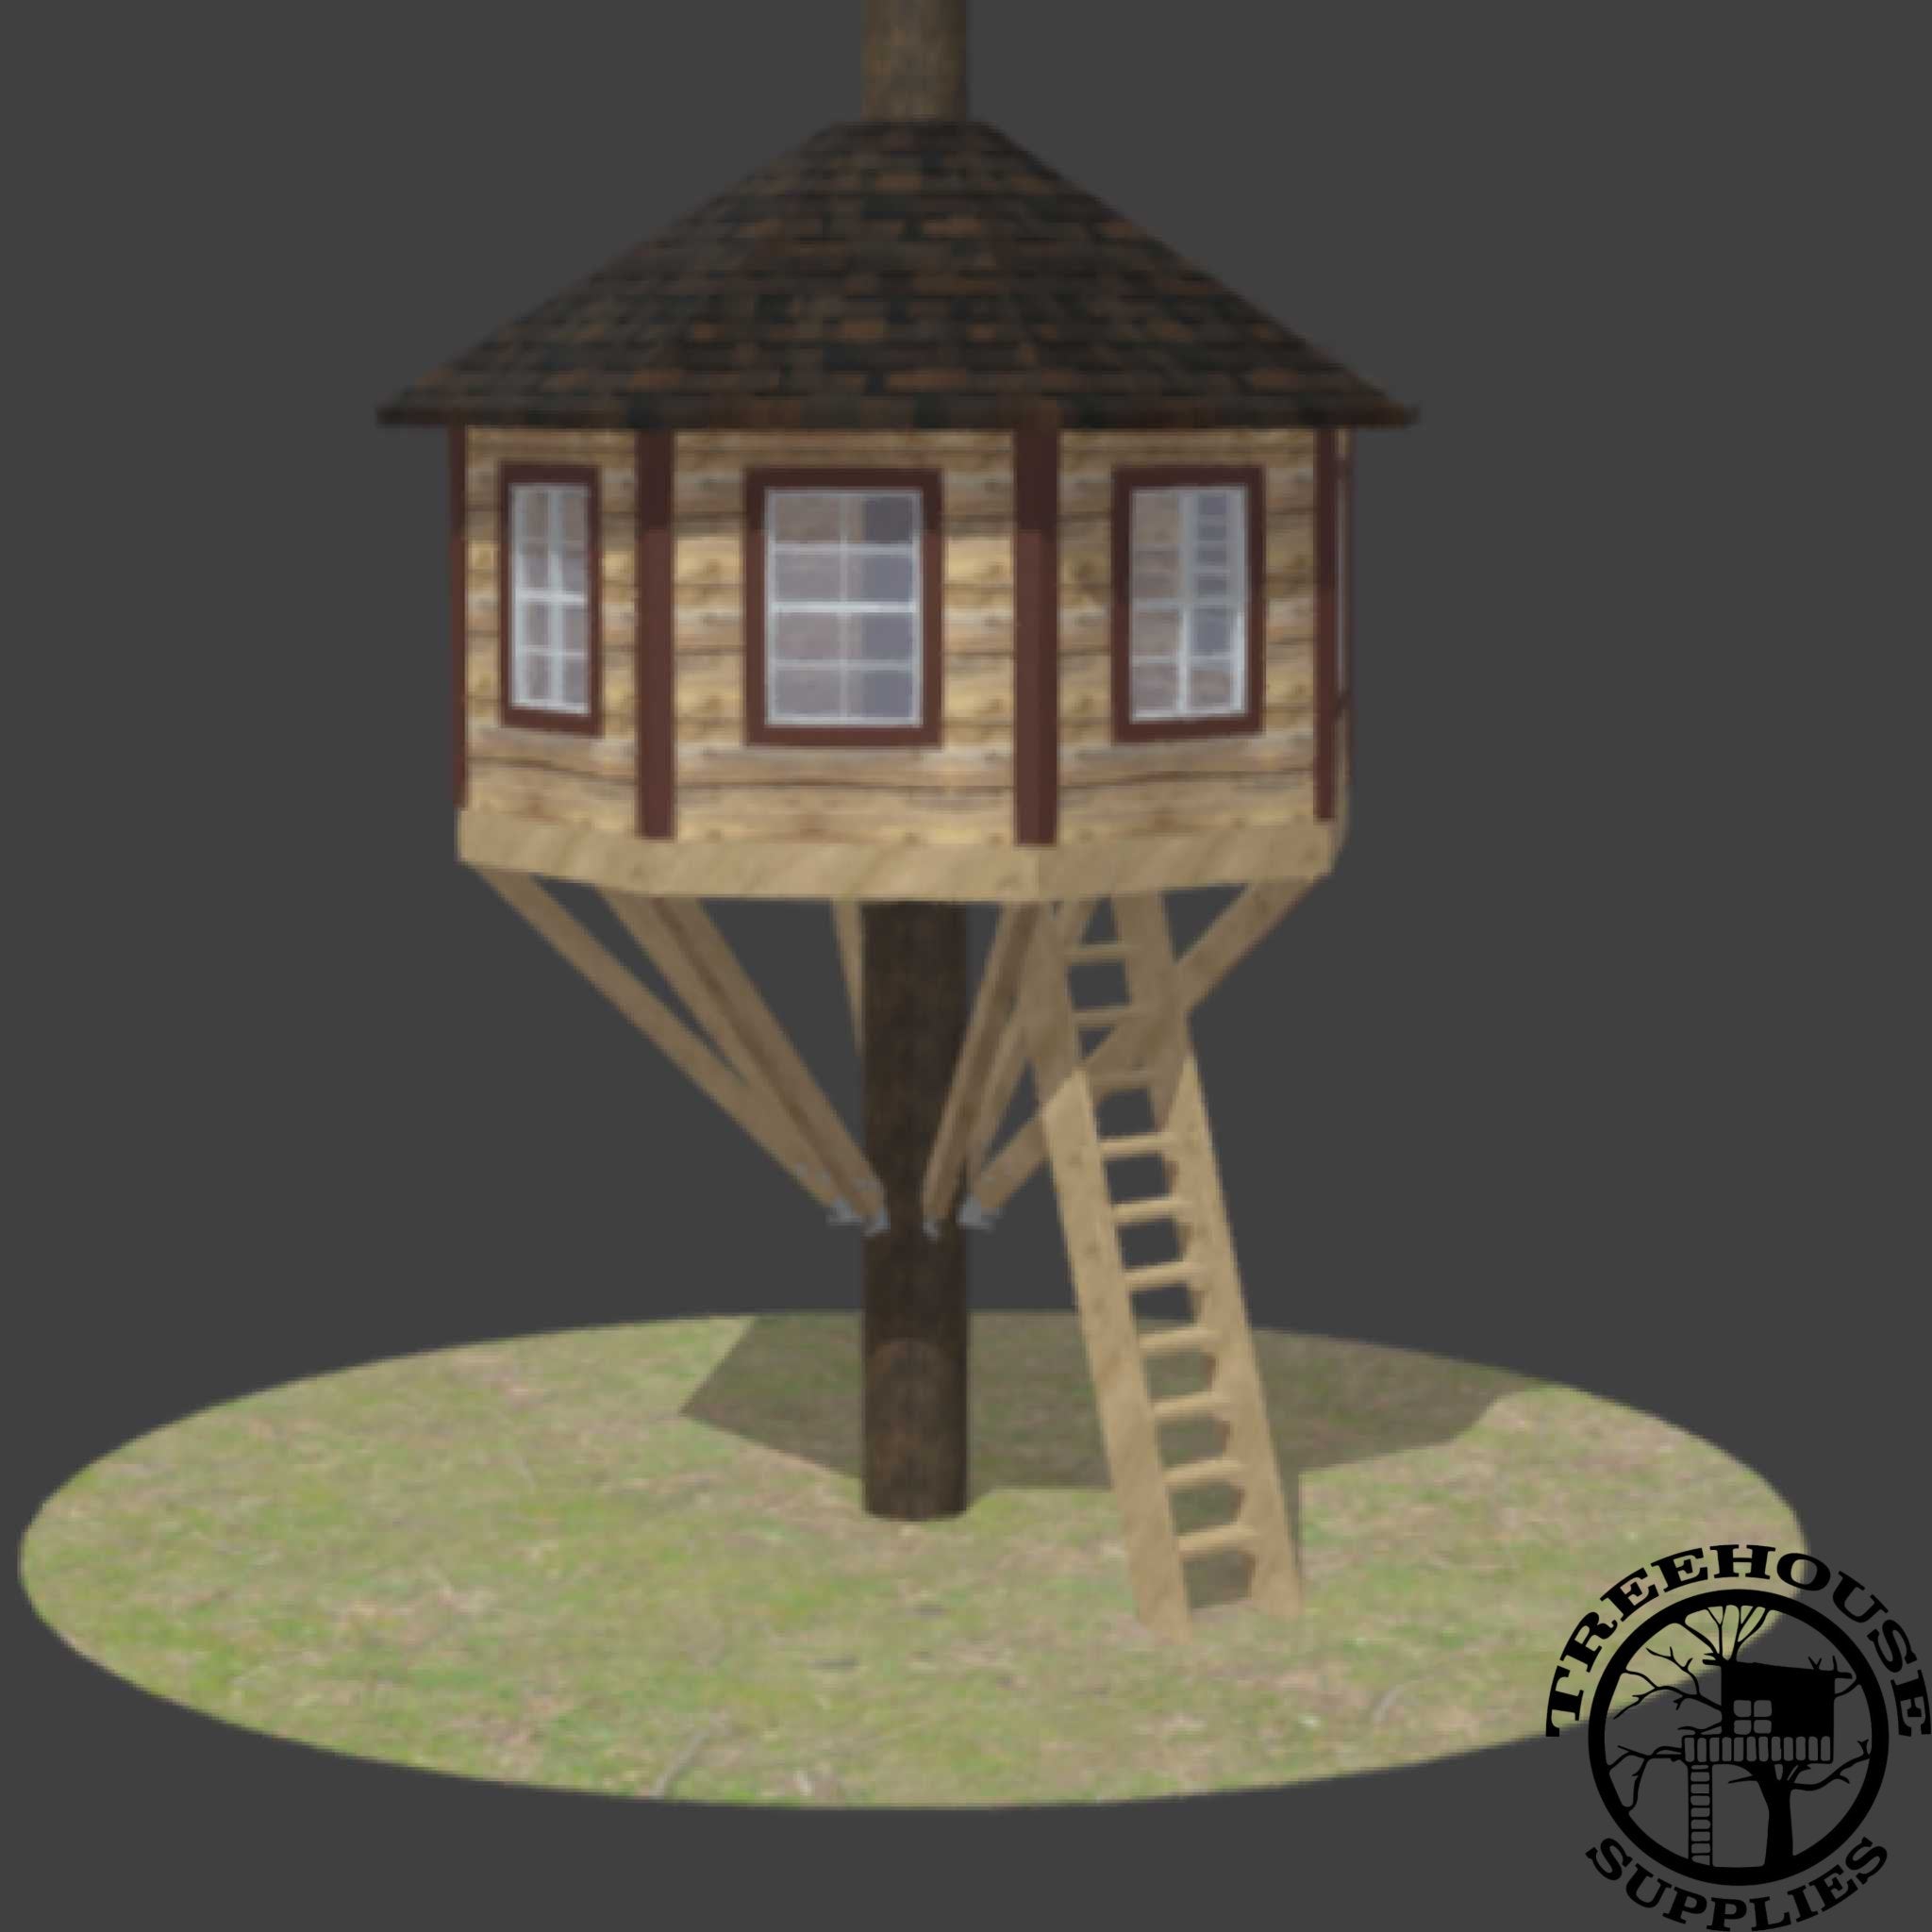 16' DIAMETER OCTAGONAL TREEHOUSE PLAN - NOW INCLUDES STEP-BY-STEP 3D MODELING!! - Treehouse Supplies